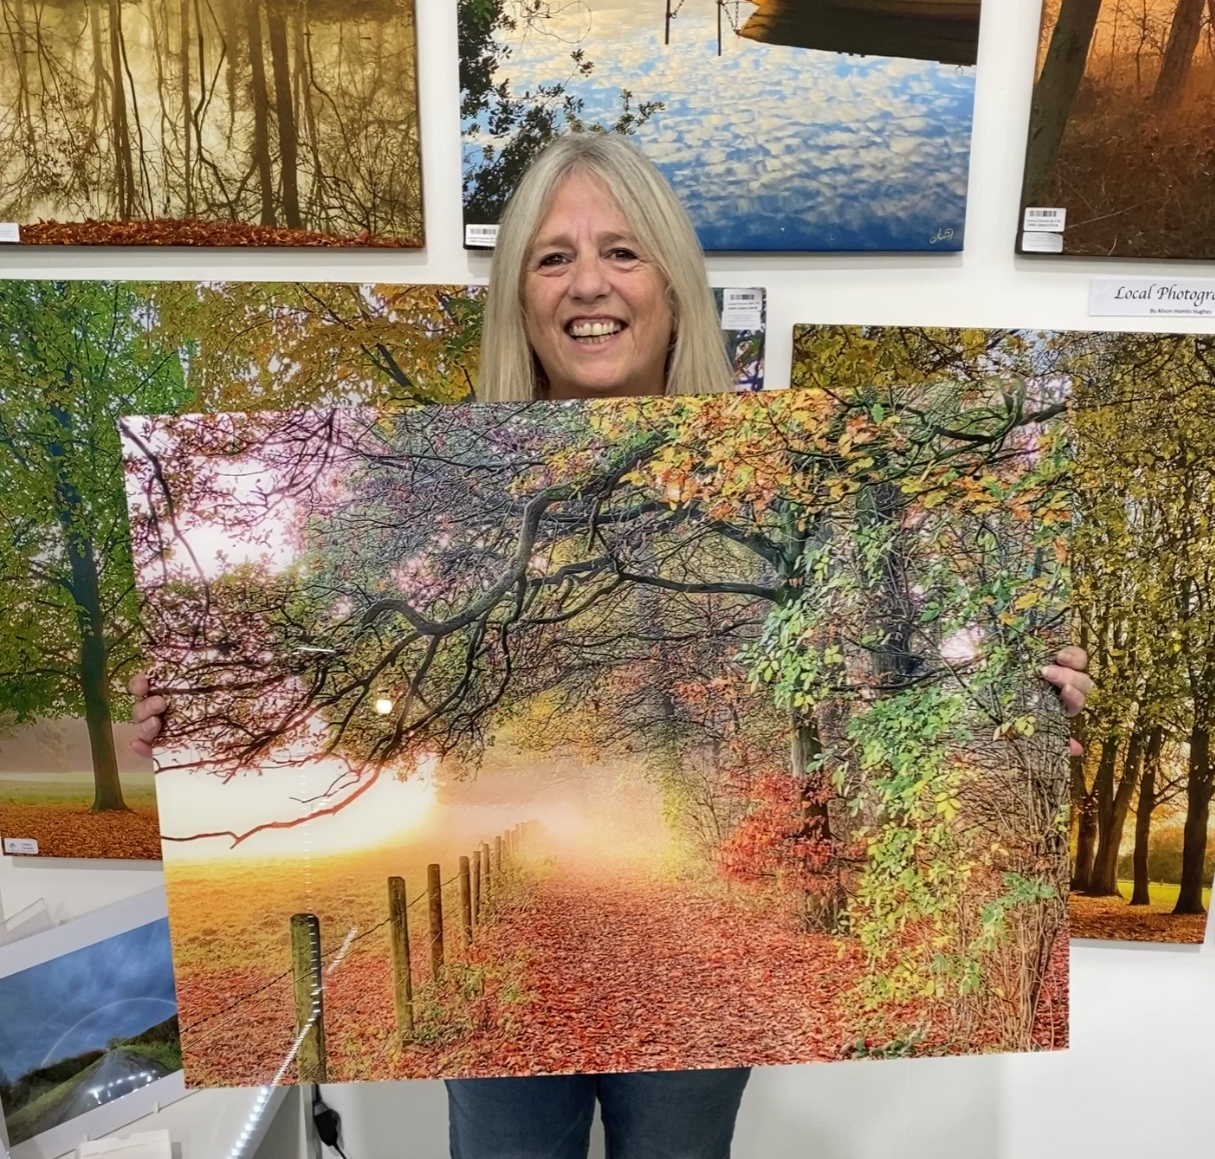 Alison with one of her photographs